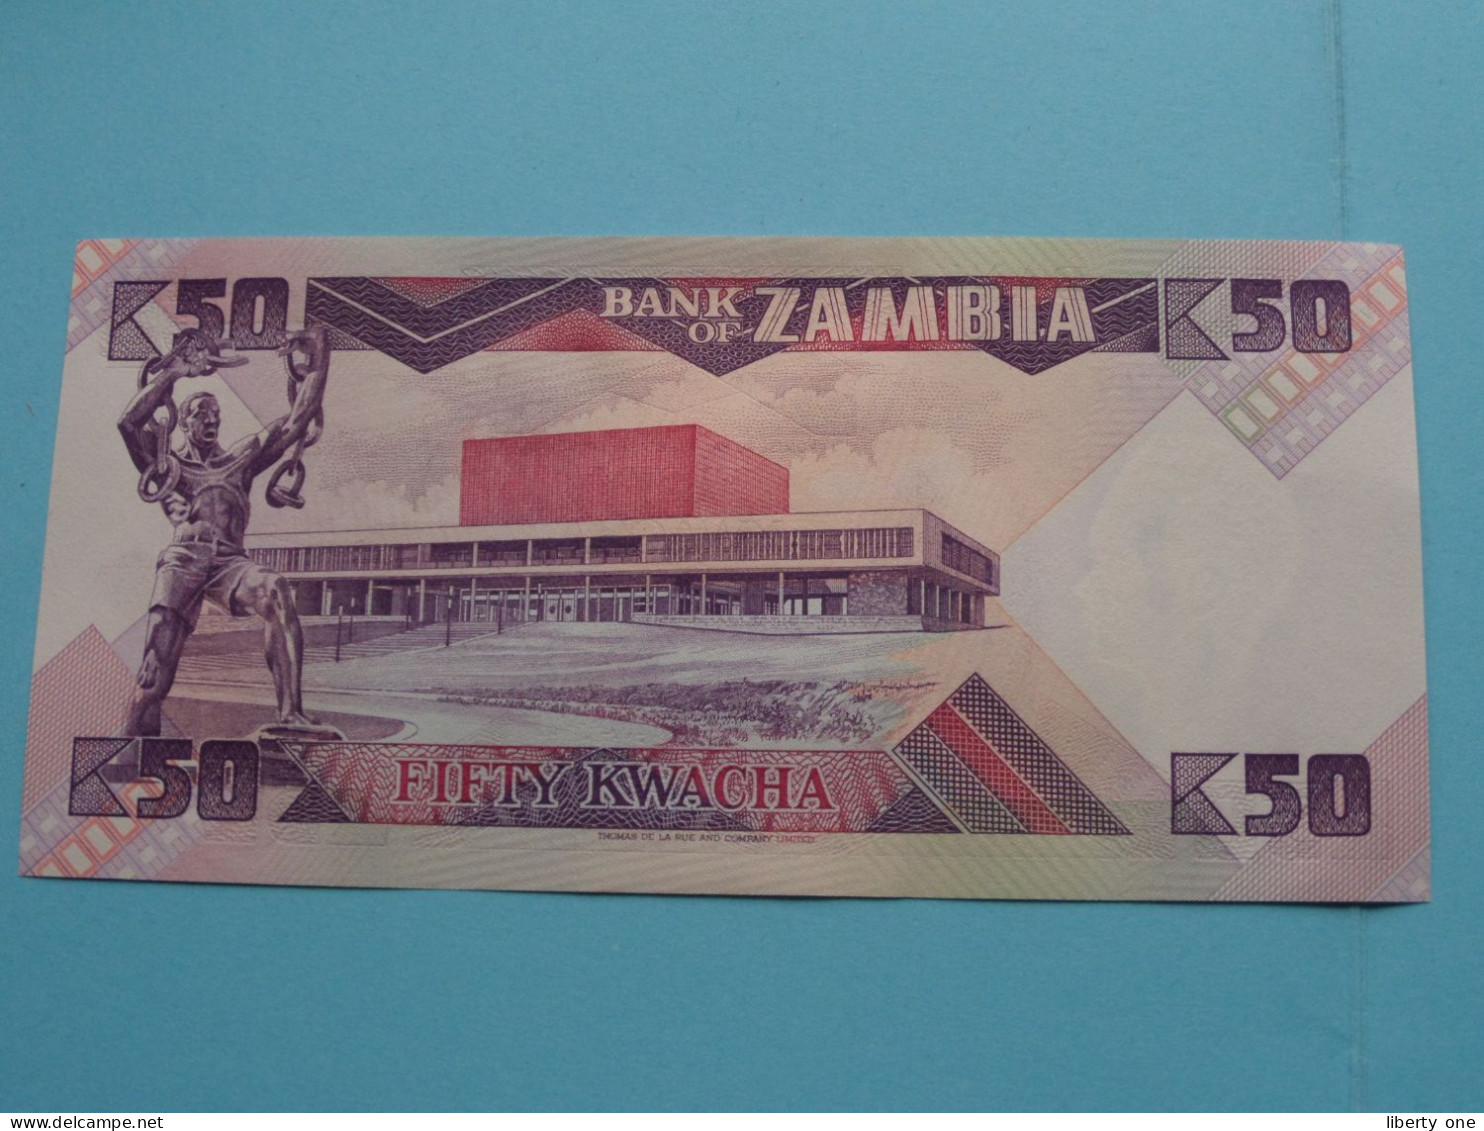 50 Fifty KWACHA ( 45/F 161527 ) Bank Of ZAMBIA ( For Grade See SCANS ) UNC ! - Zambia